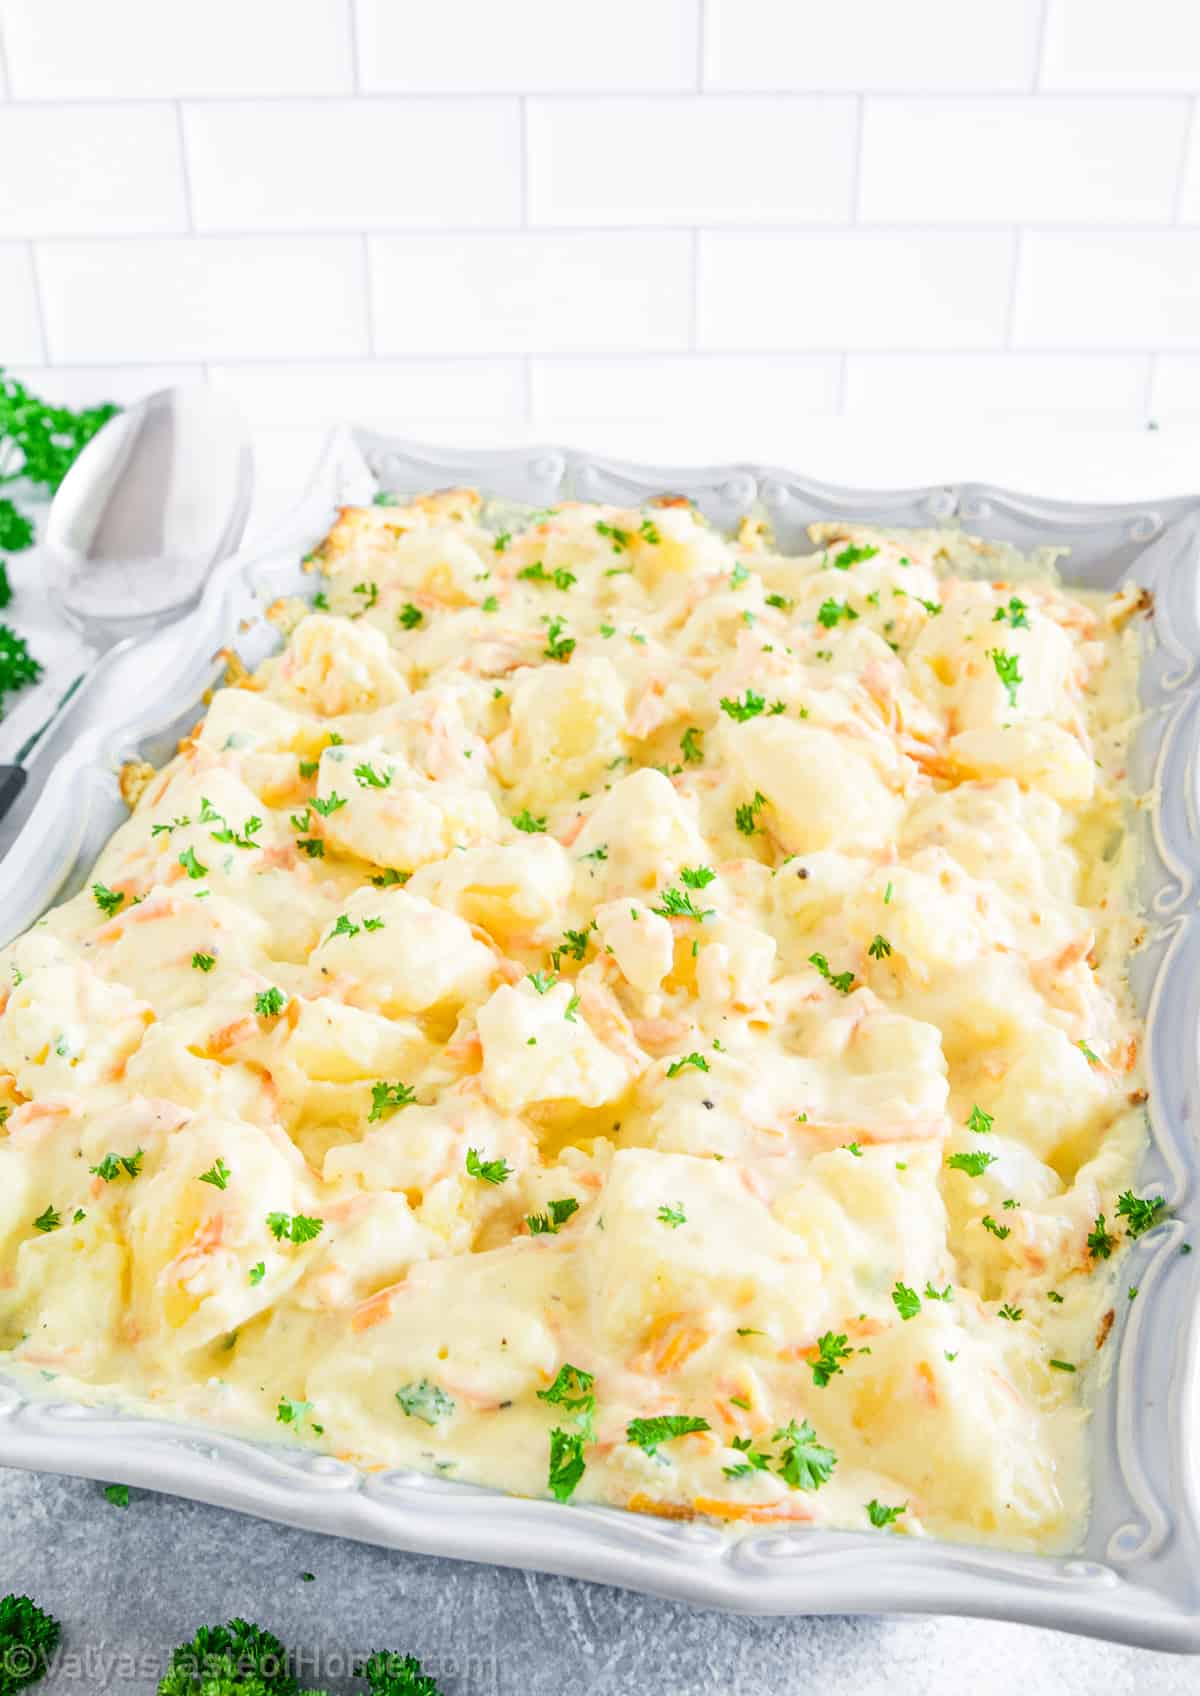 Your delicious Potato Casserole is ready to serve.